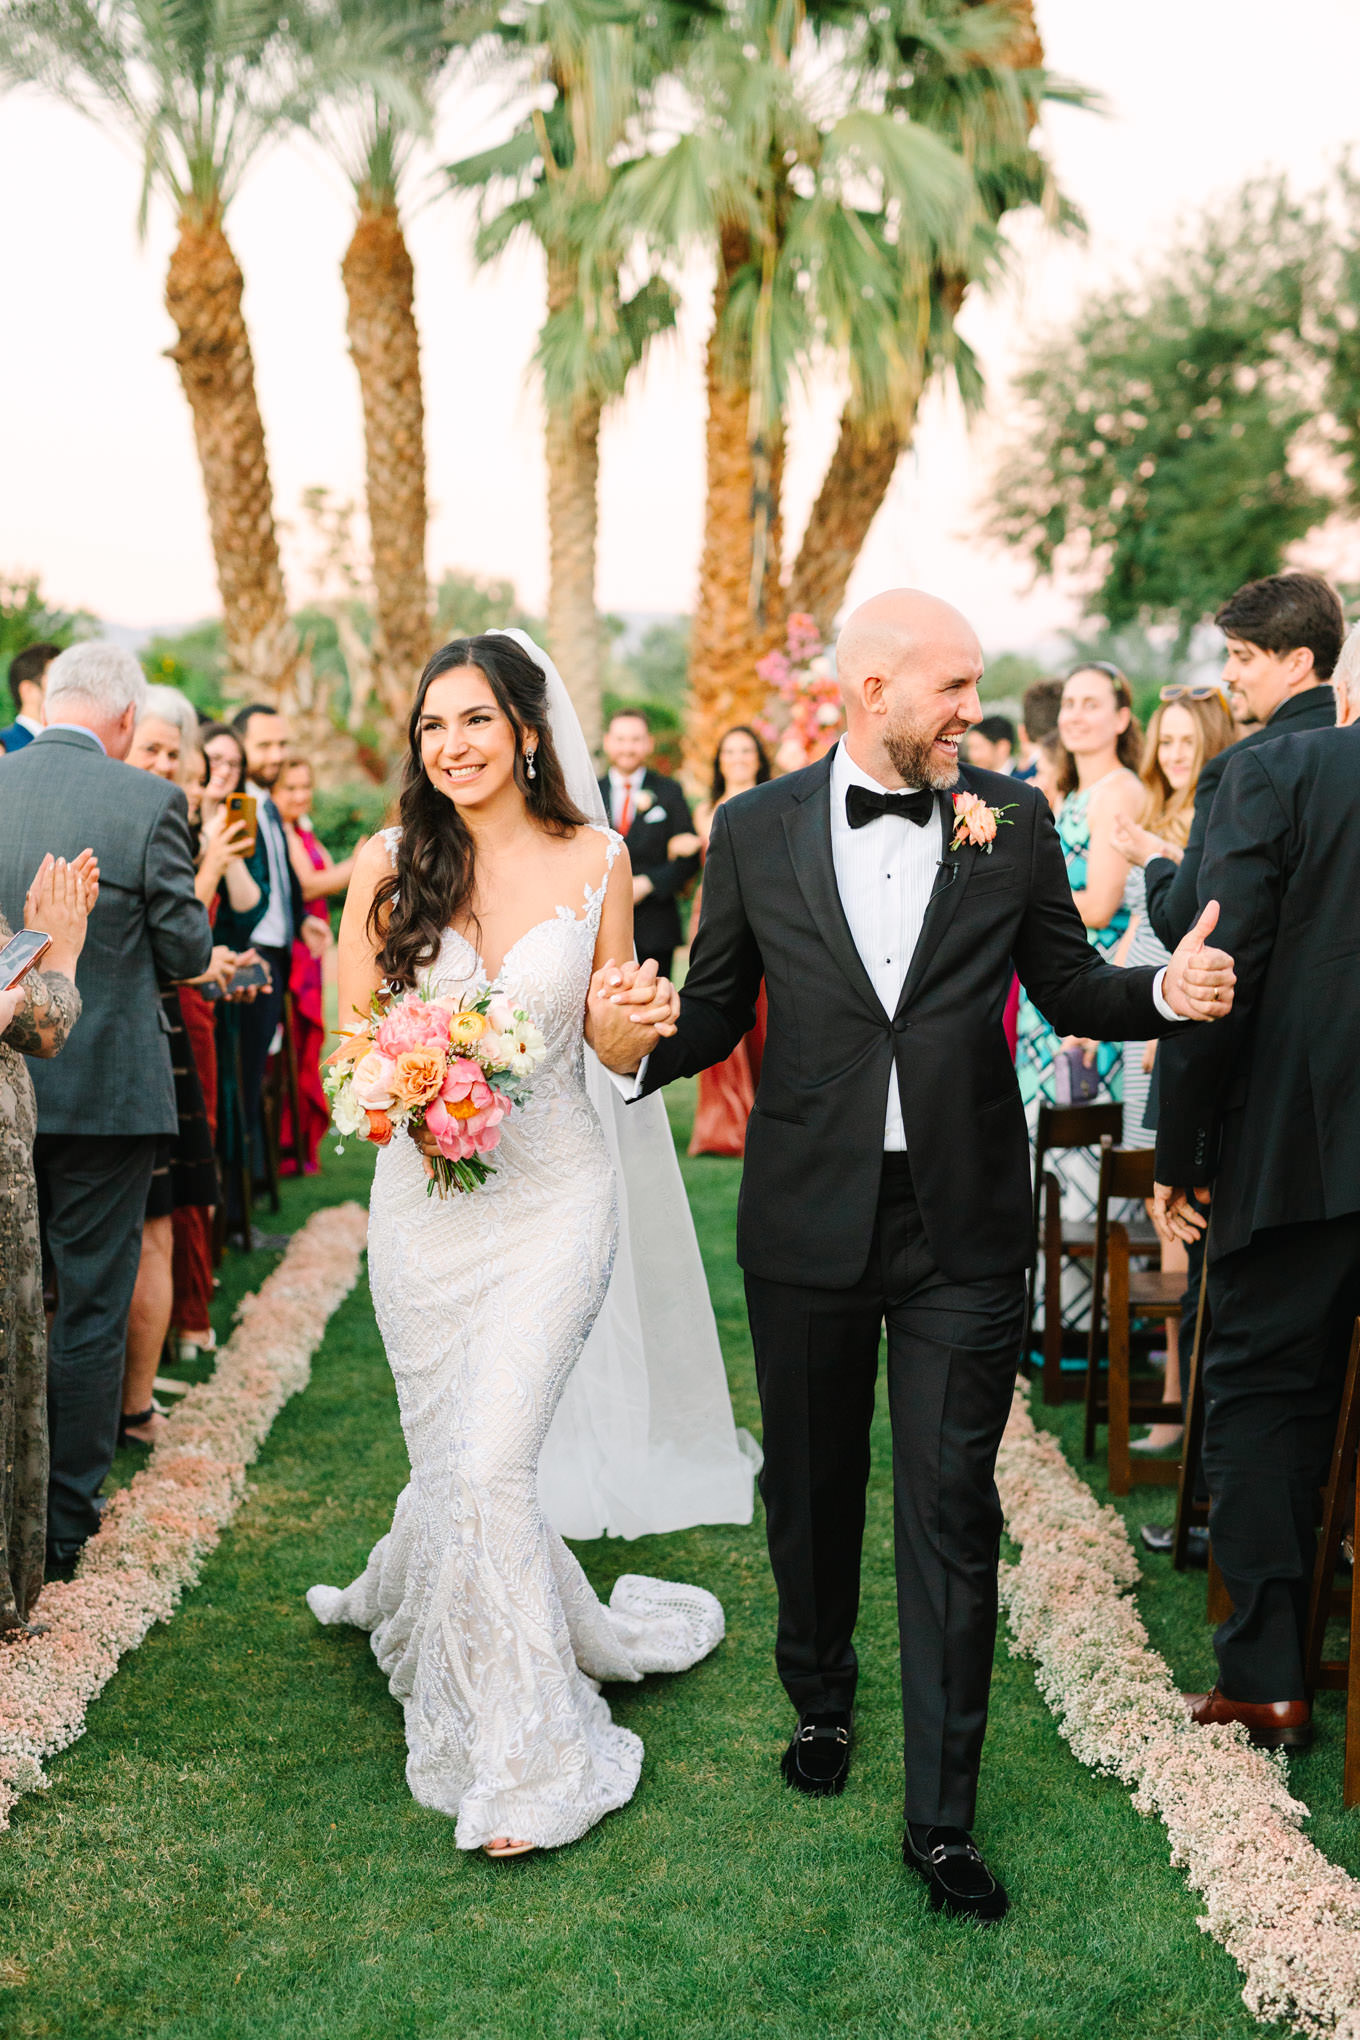 Walk down aisle| Pink Bougainvillea Estate wedding | Colorful LA wedding photography | #bougainvilleaestate #palmspringswedding #palmspringsweddingvenue #palmspringsphotographer Source: Mary Costa Photography | Los Angeles